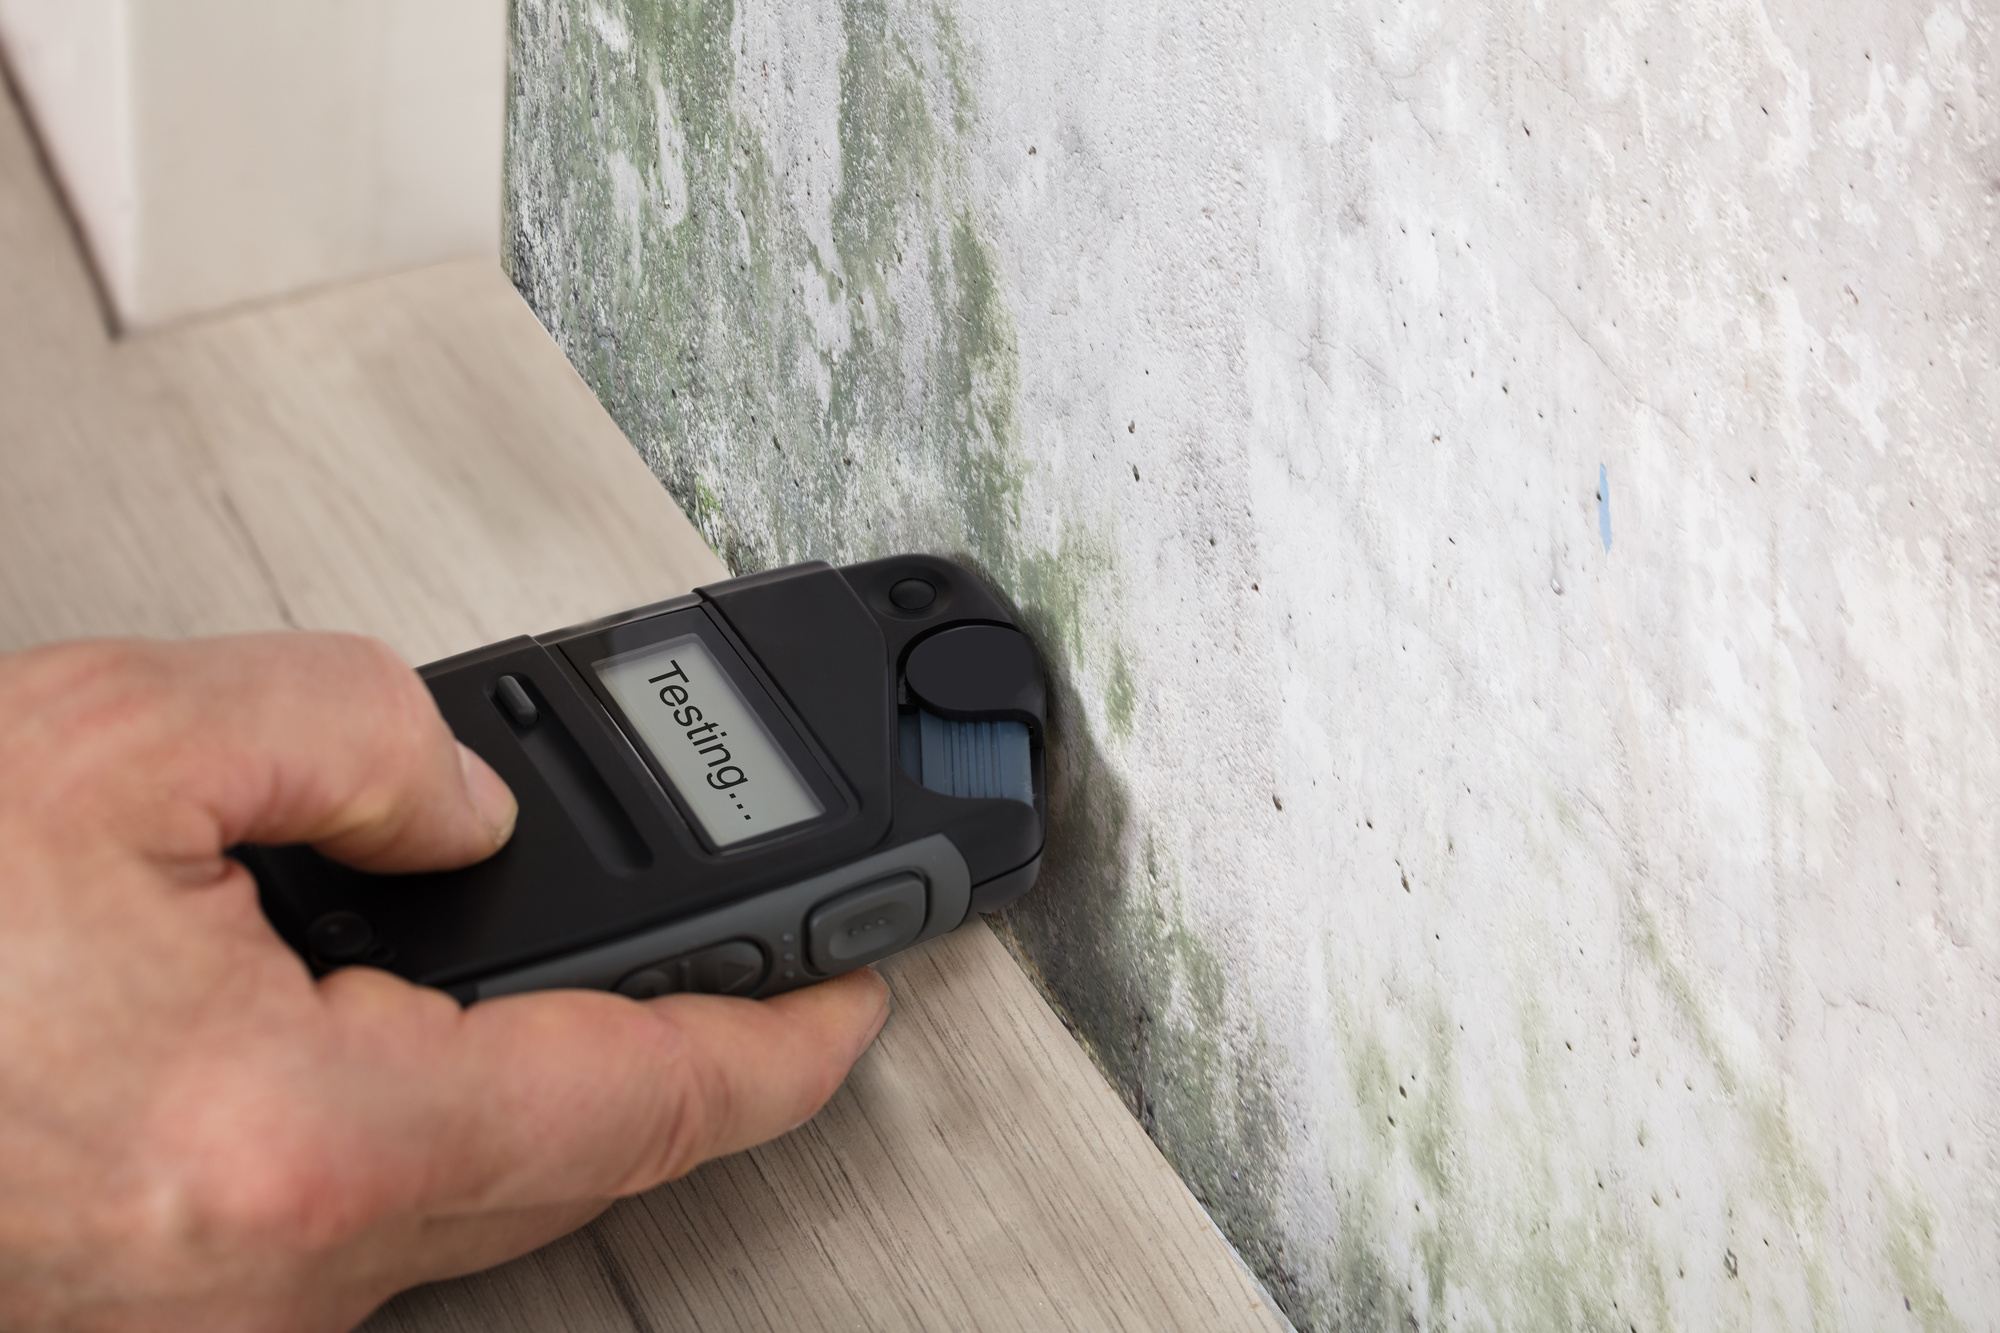 8 Signs That You Need Mold Inspection